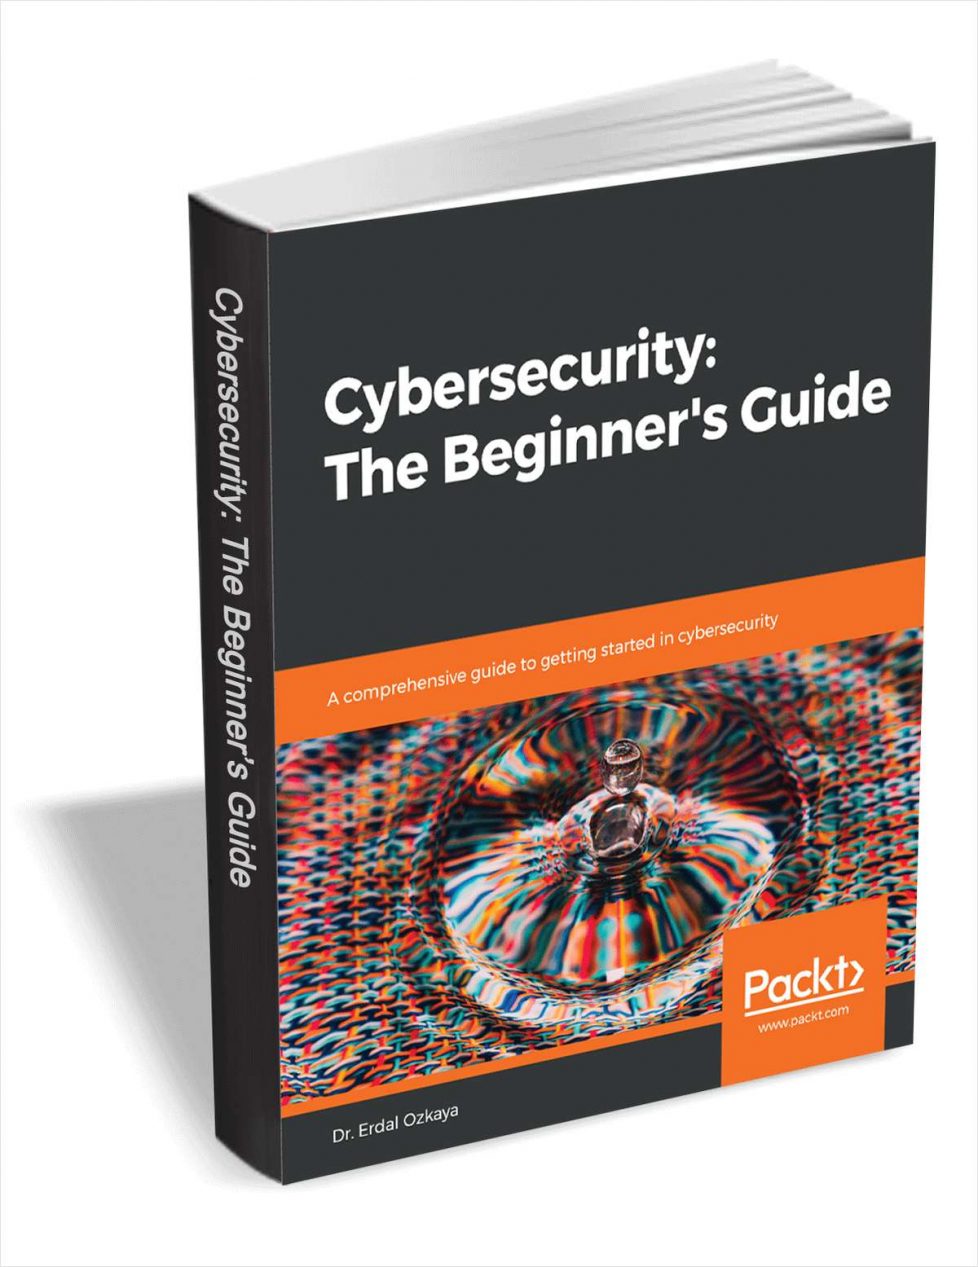 Cybersecurity The Beginner’s Guide eBook Giveaway Reseller dot Re